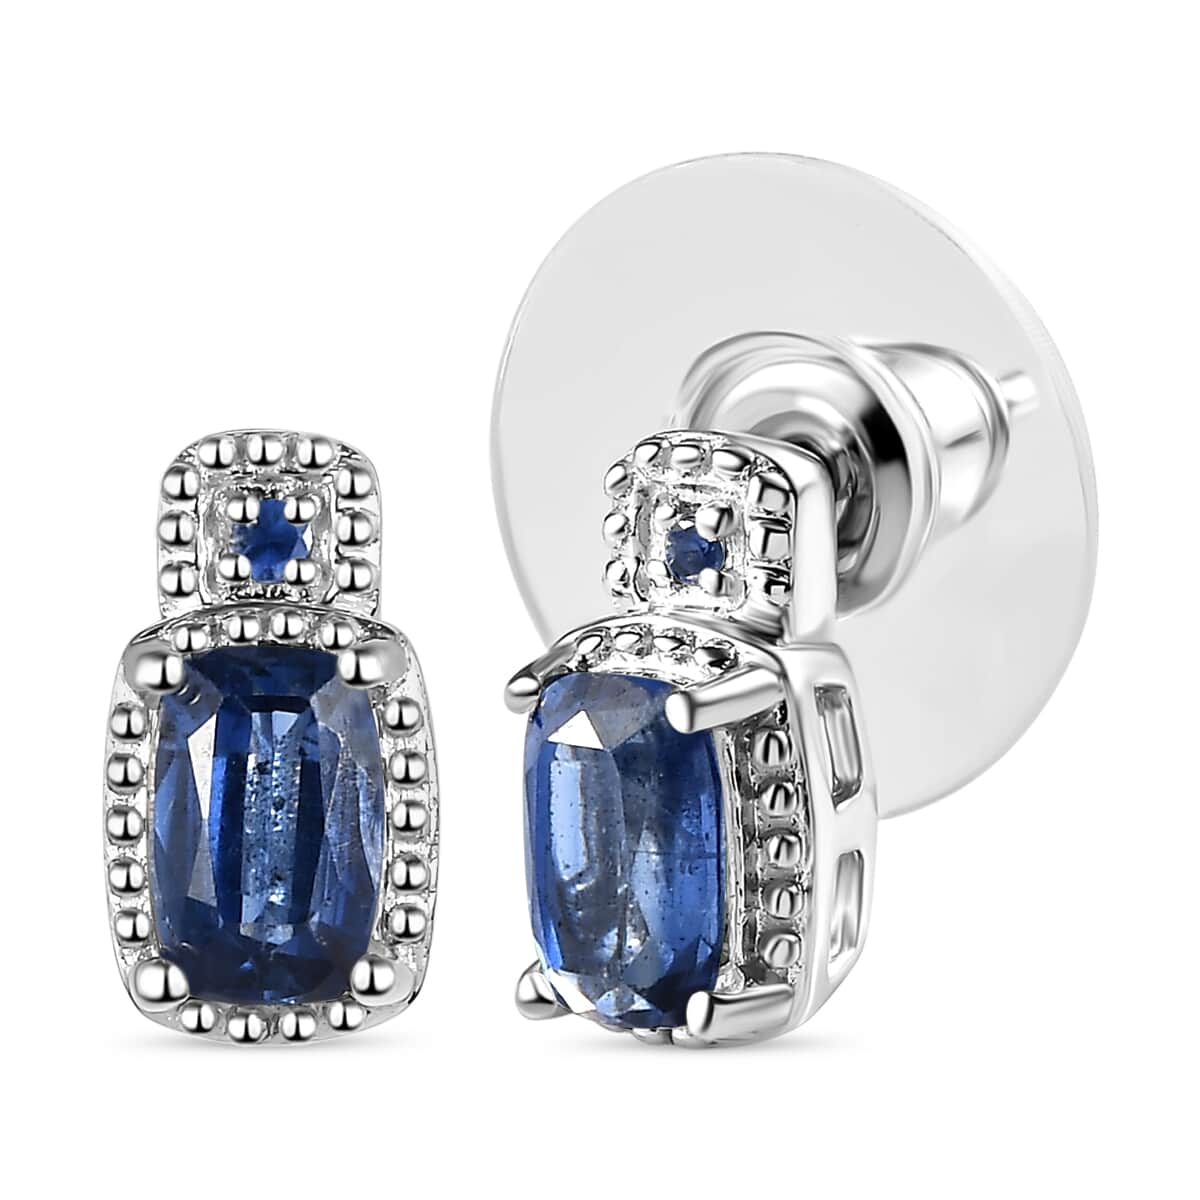 Shop LC Himalayan Kyanite, Blue Sapphire Stud Earrings, Ring (Size 8.0) and Pendant in Platinum Over Sterling Silver with Stainless Steel Necklace 20 Inches